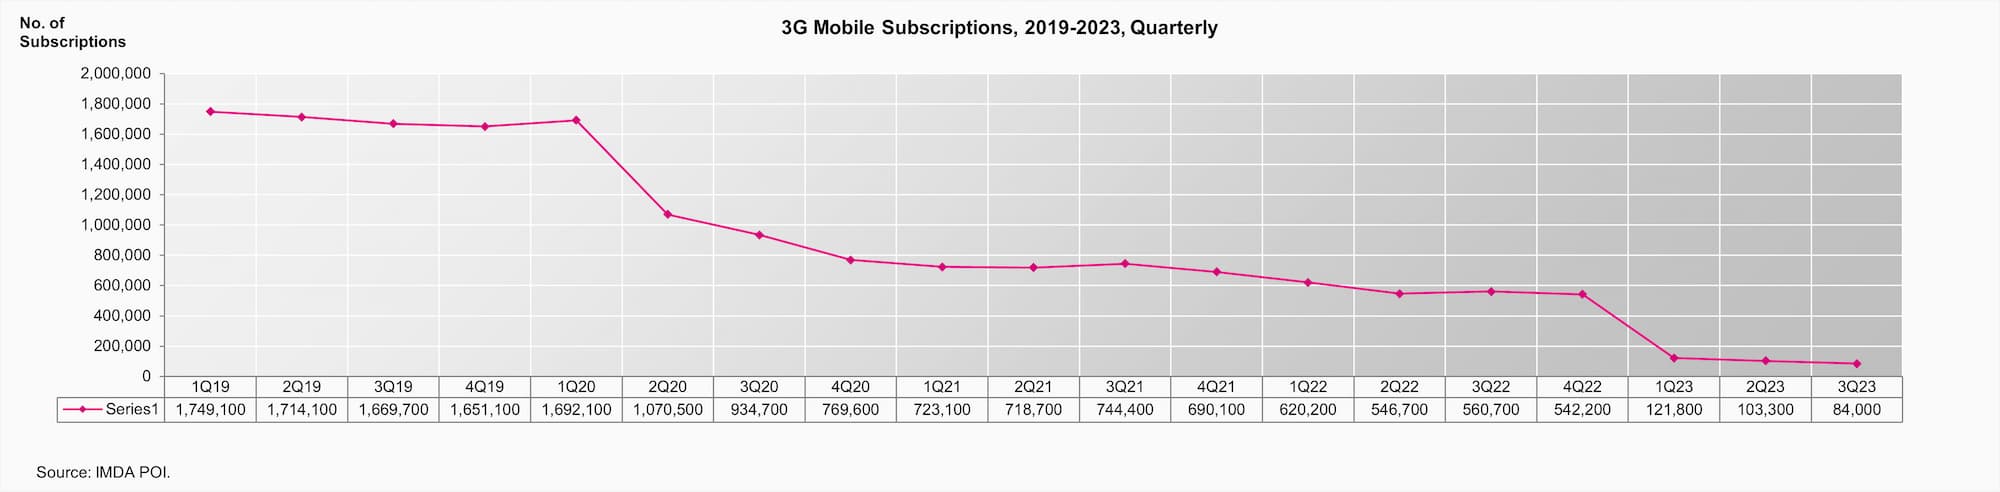 Q3 3G Mobile Subscriptions